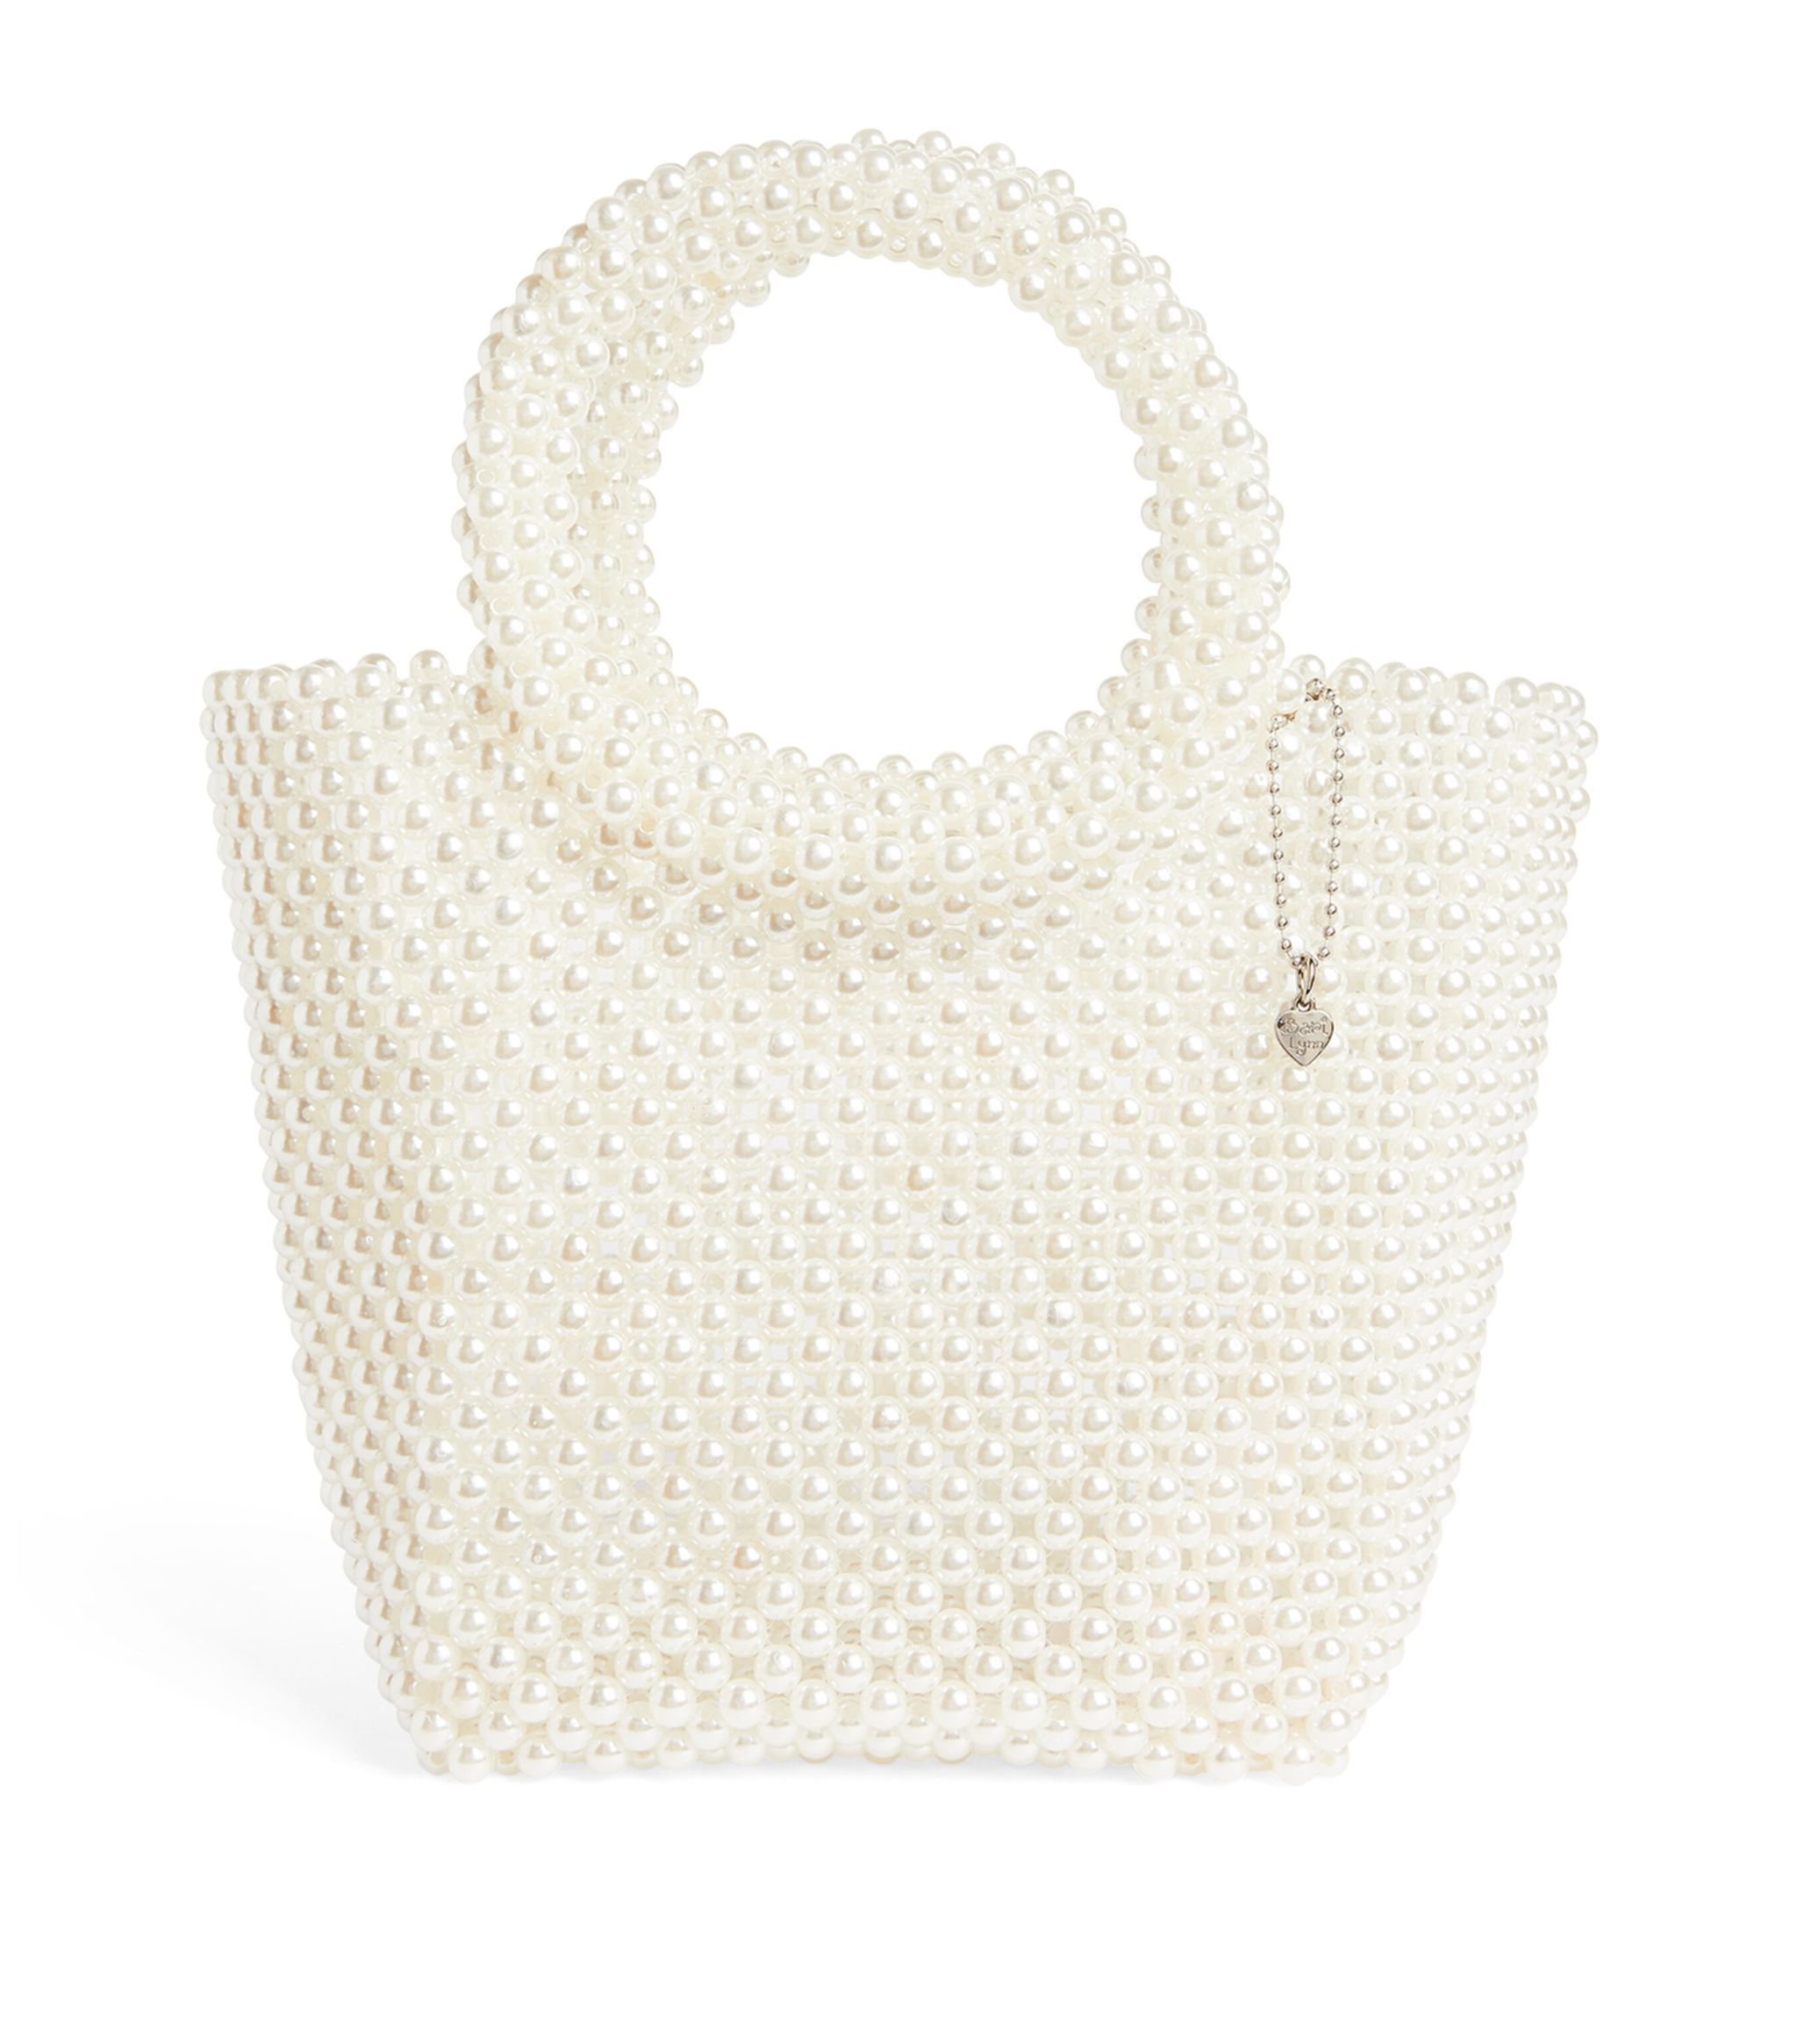 Faux Pearl Round-Handled Bag | Harrods